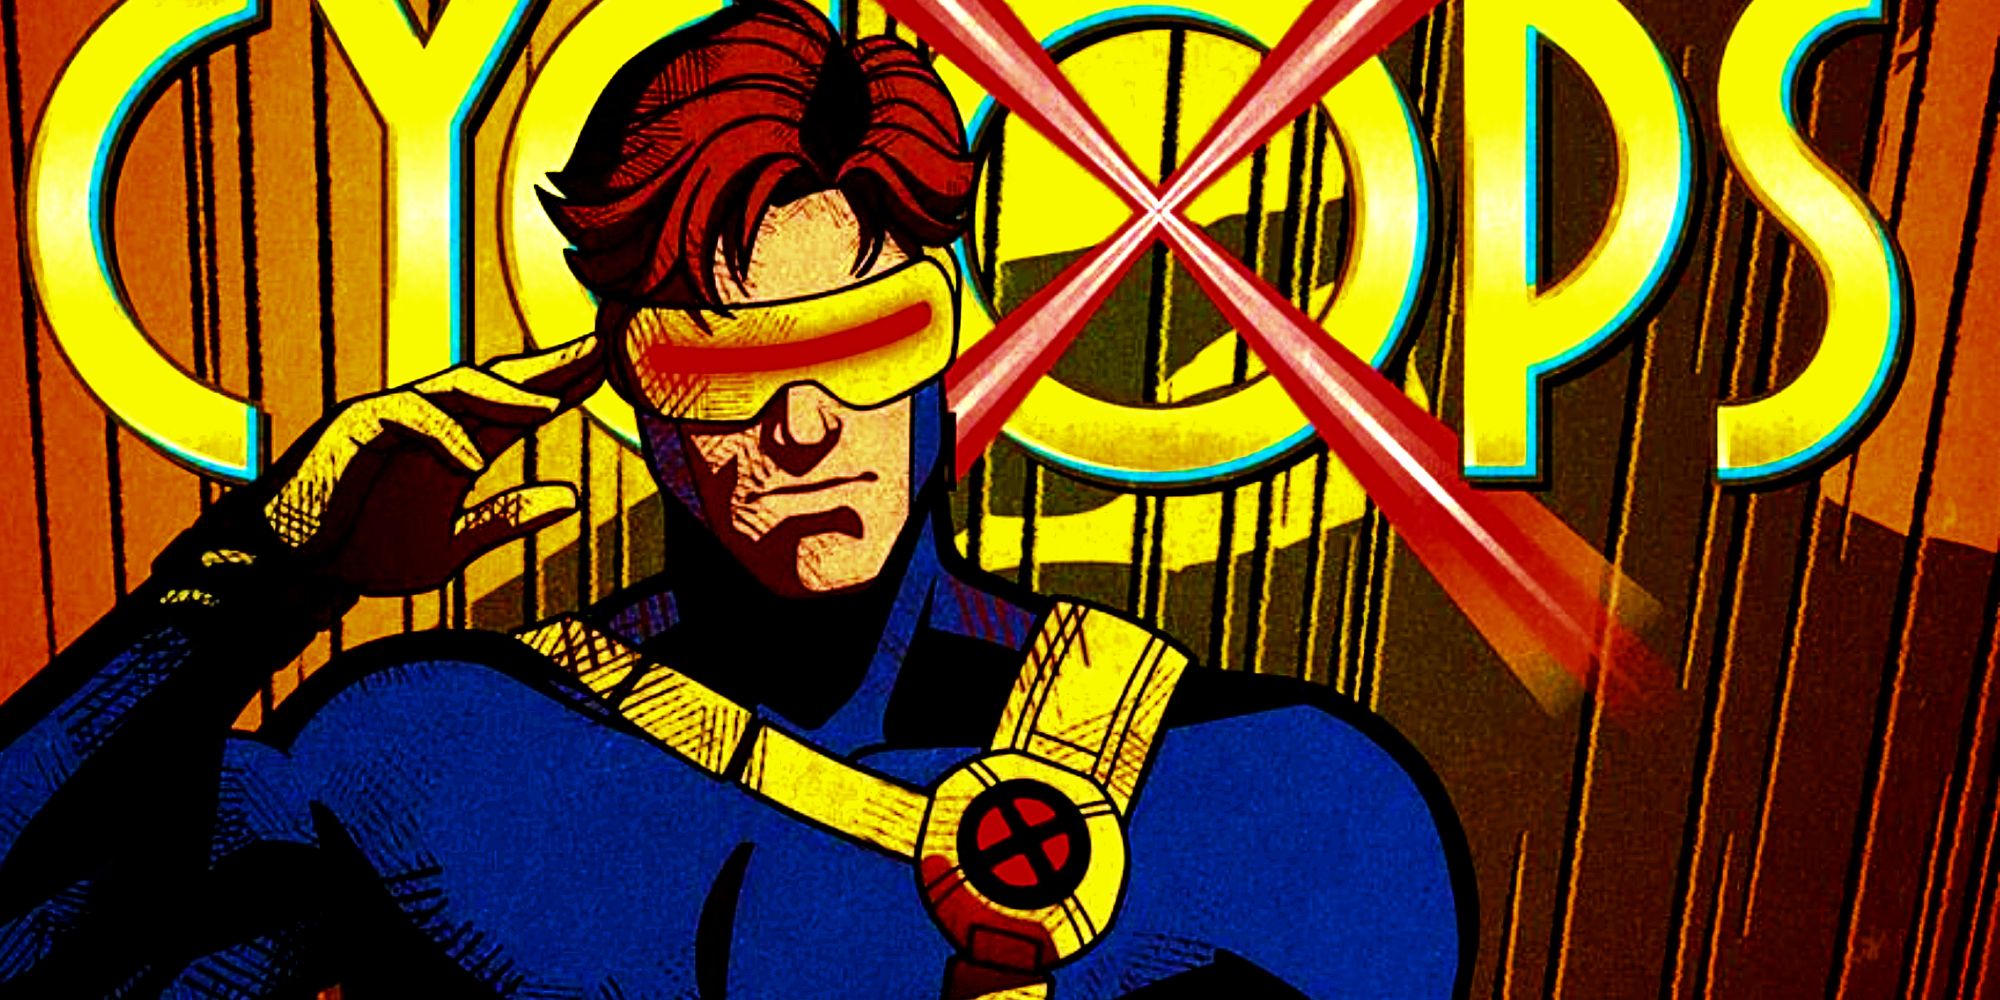 Cyclops reaches up to touch his ruby quartz visor. The word 'Cyclops' is written in yellow writing in the background. 